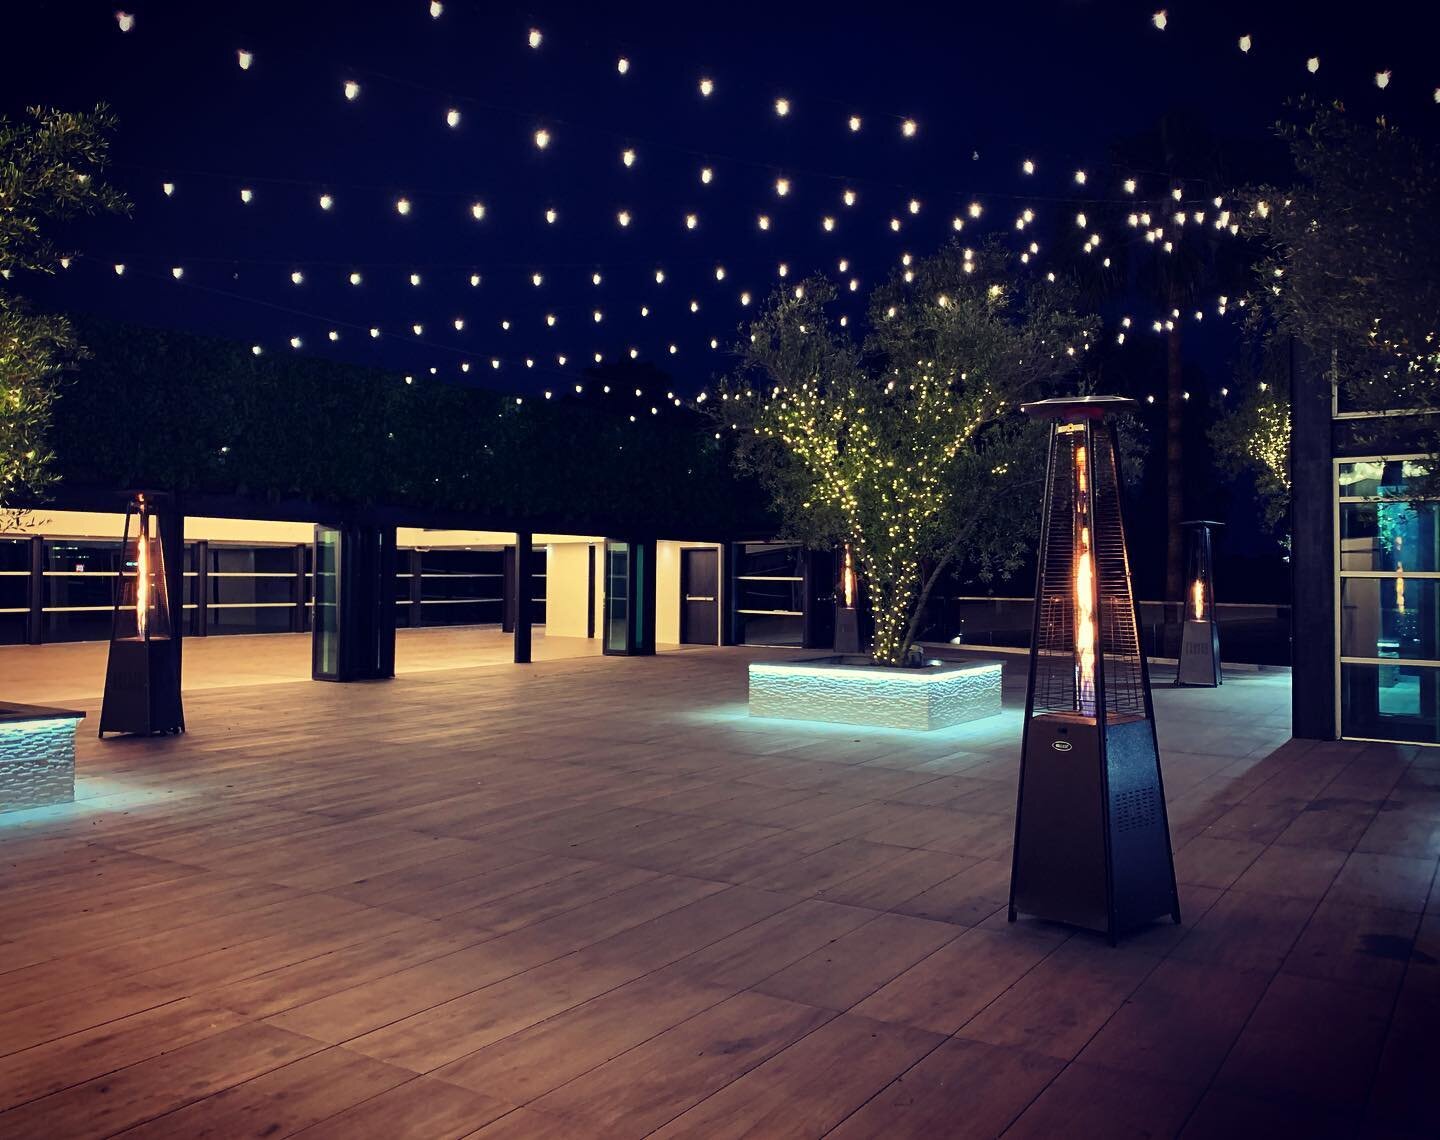 Even thou 2020 is an insane year to soft launch... we are hopeful and find great excitement it hosting lovely celebrations at some point in 2021, and Photo + film shoots now.... @palmsophiarooftop Culver City is a breathtaking New indoor/outdoor venu